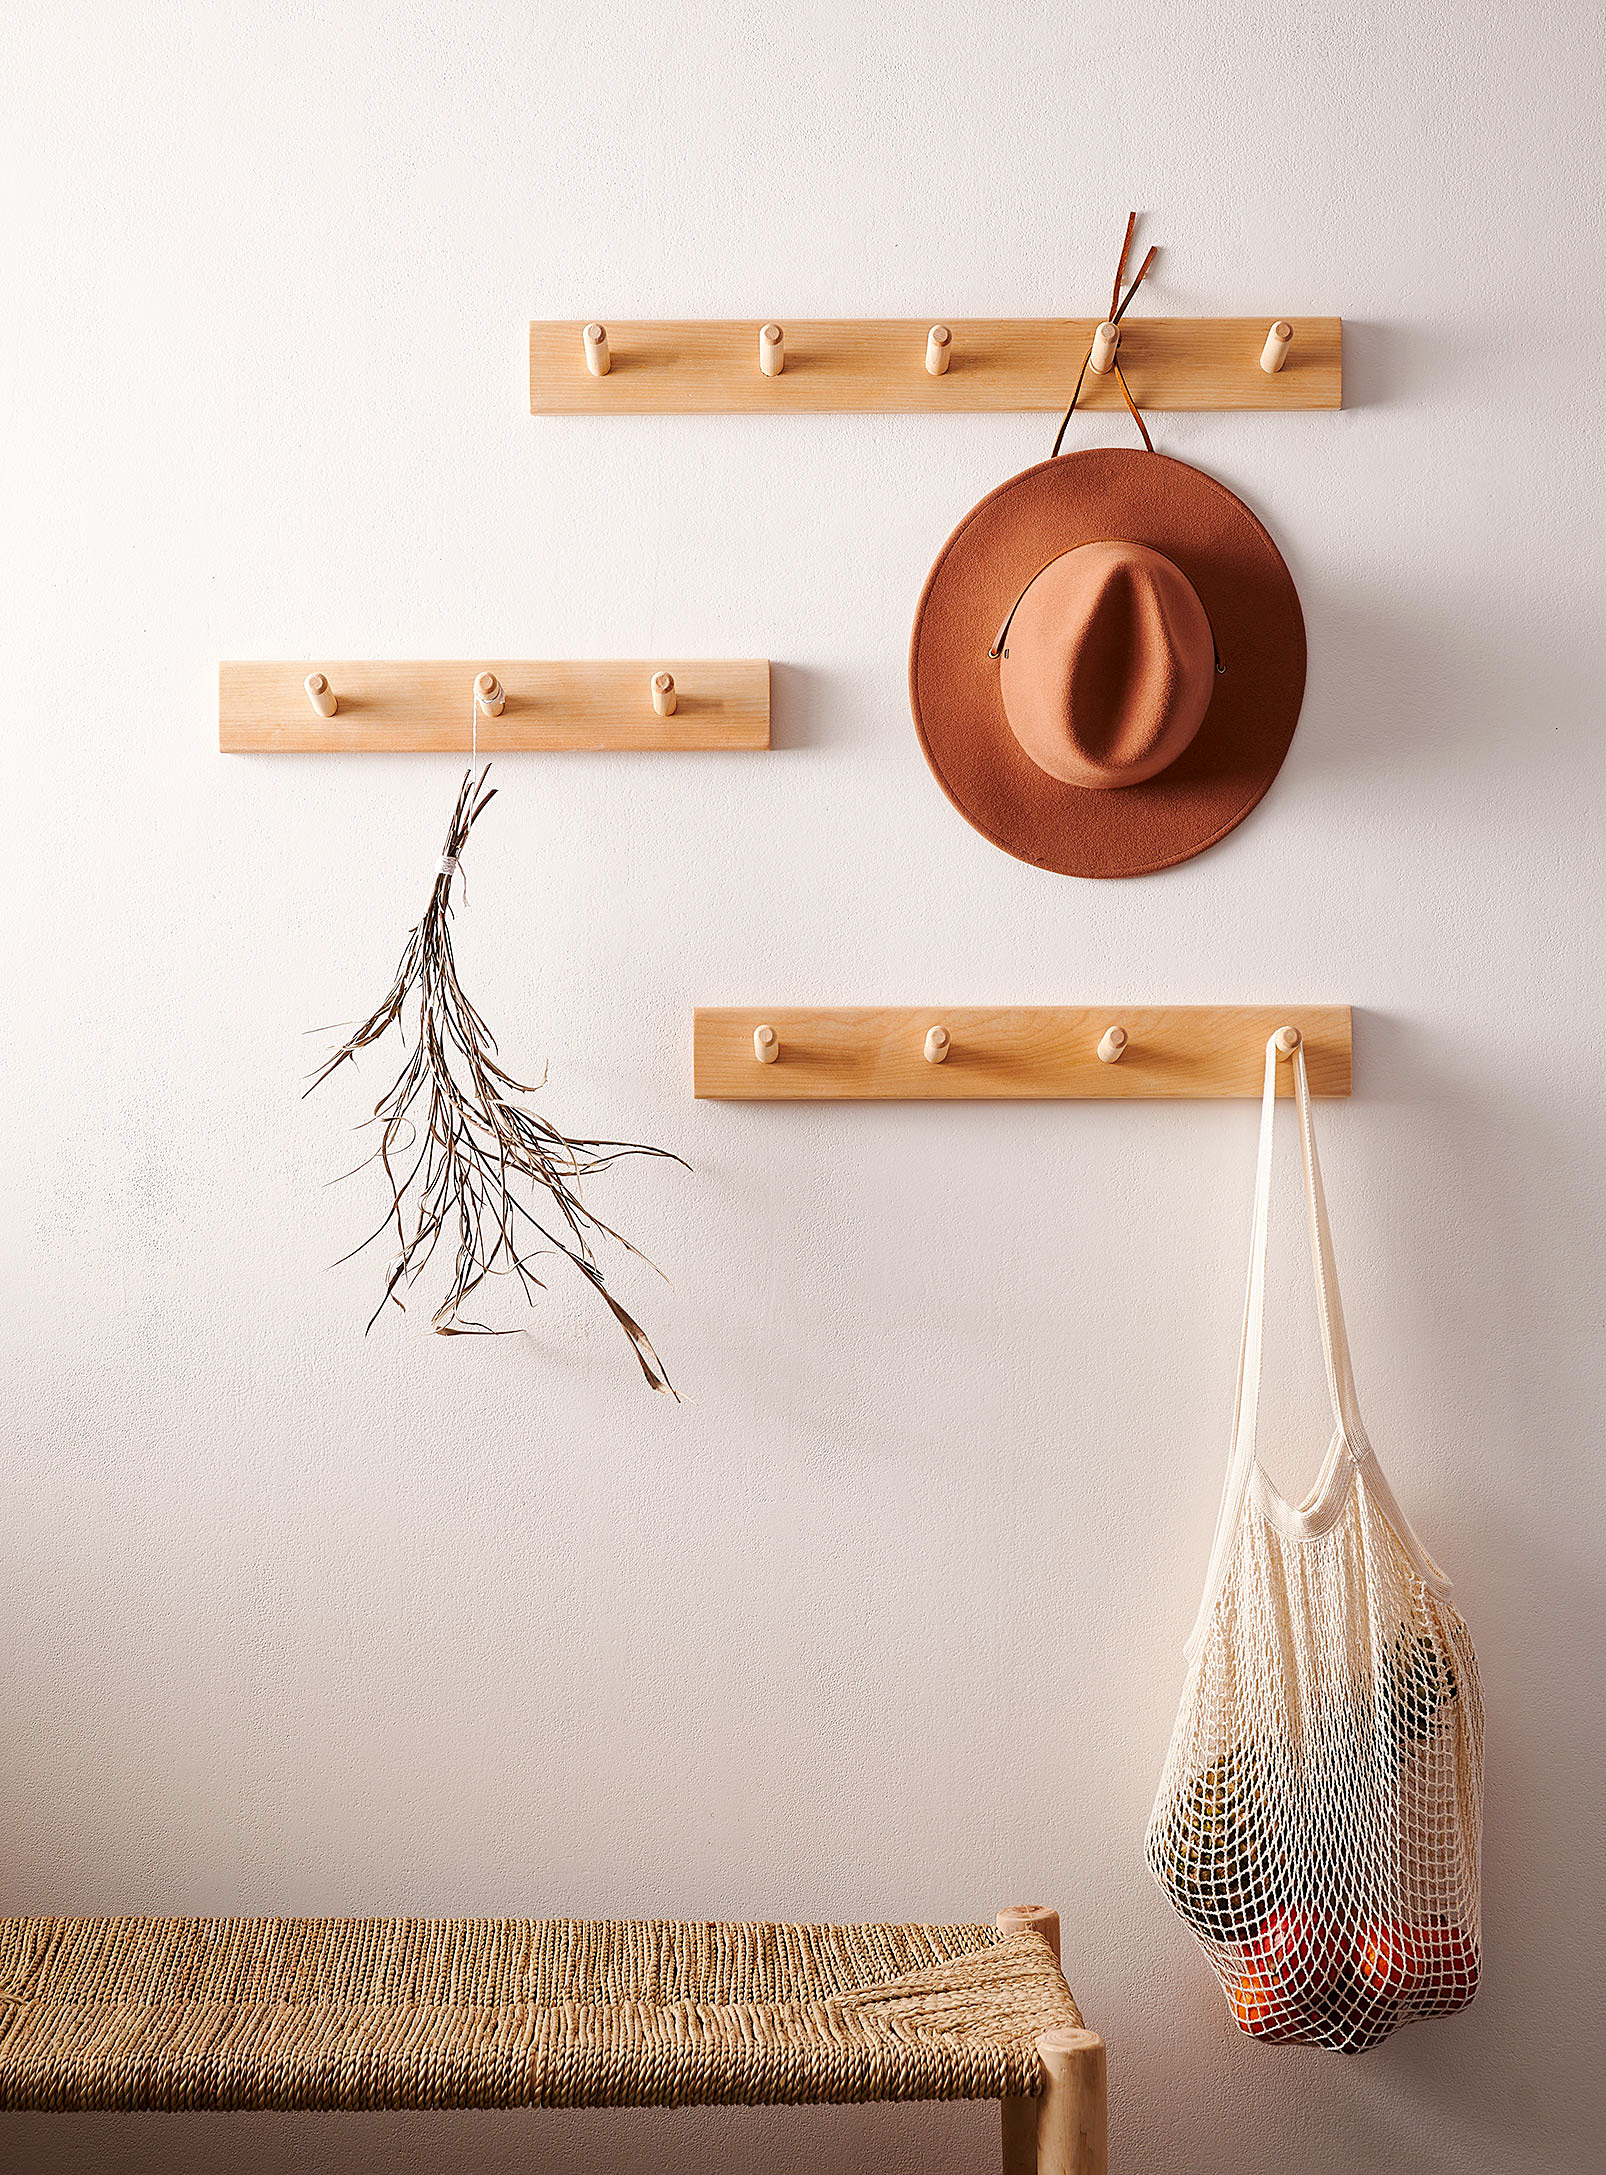 Livcan Design Peg Hooks Wall-mounted Coat Rack In Assorted